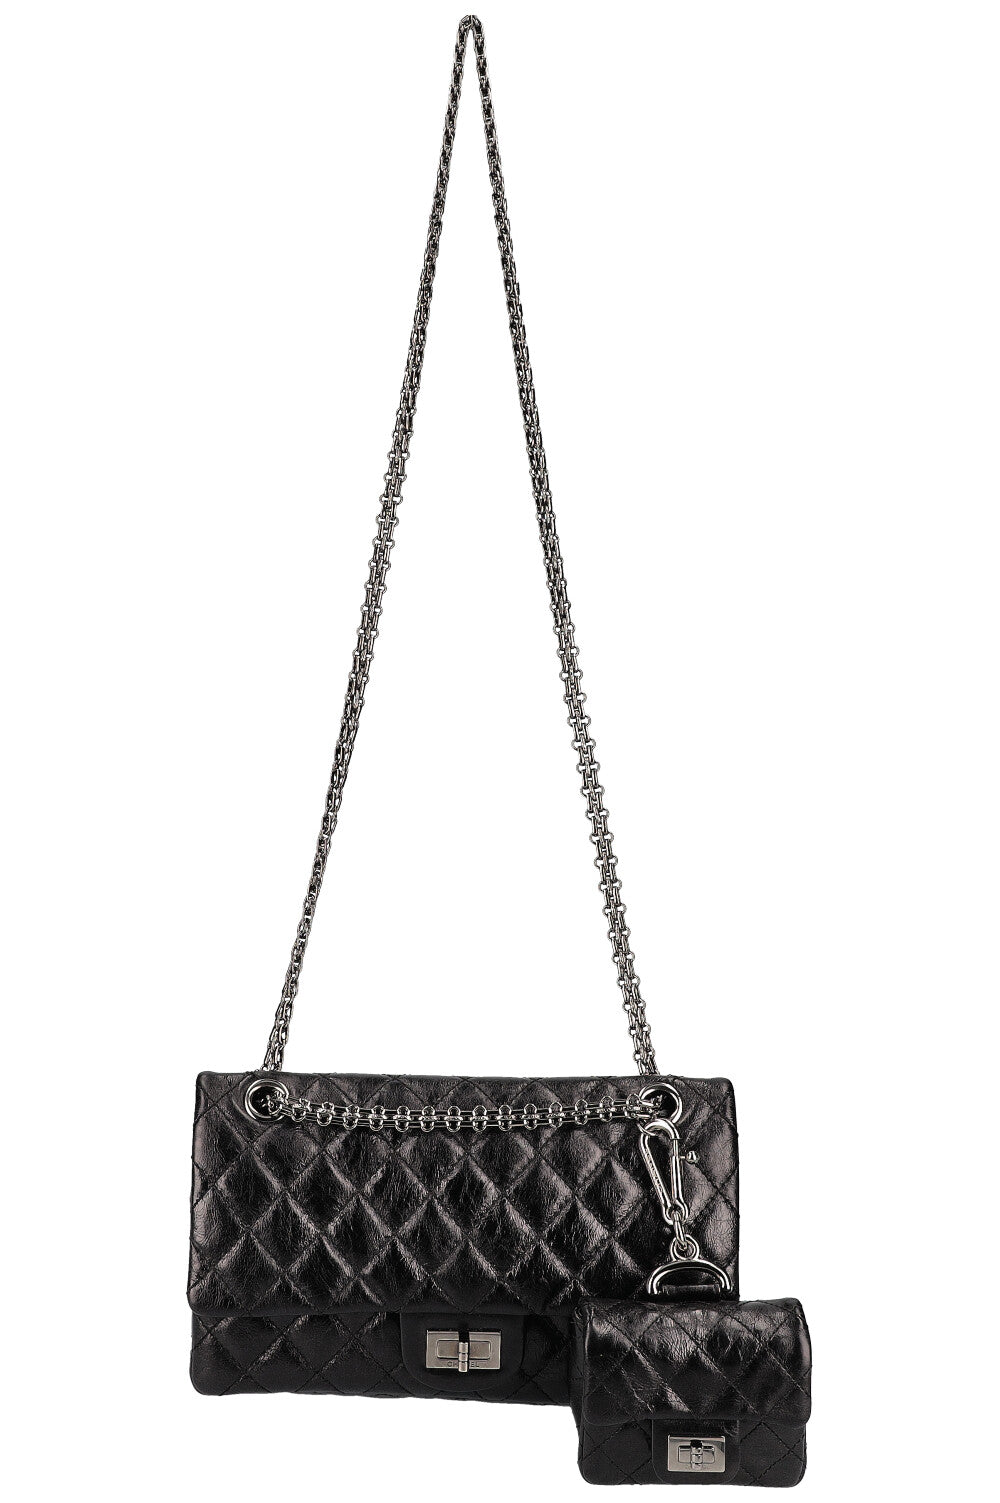 CHANEL Limited Edition 2.55 Small Black